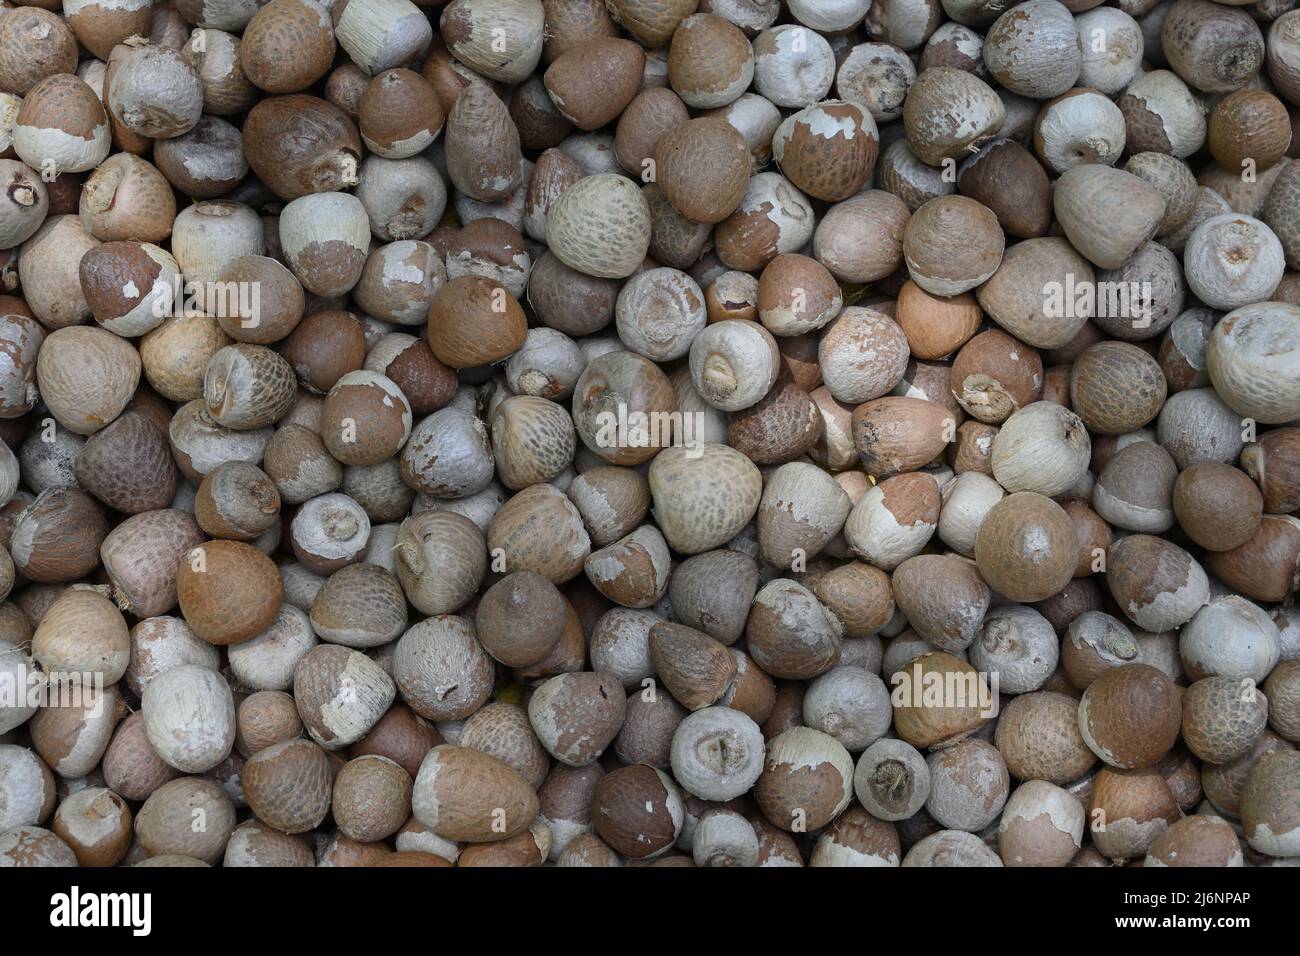 Overhead view of the husk removed piles of Areca nuts or betel nuts (Areca catechu) Stock Photo